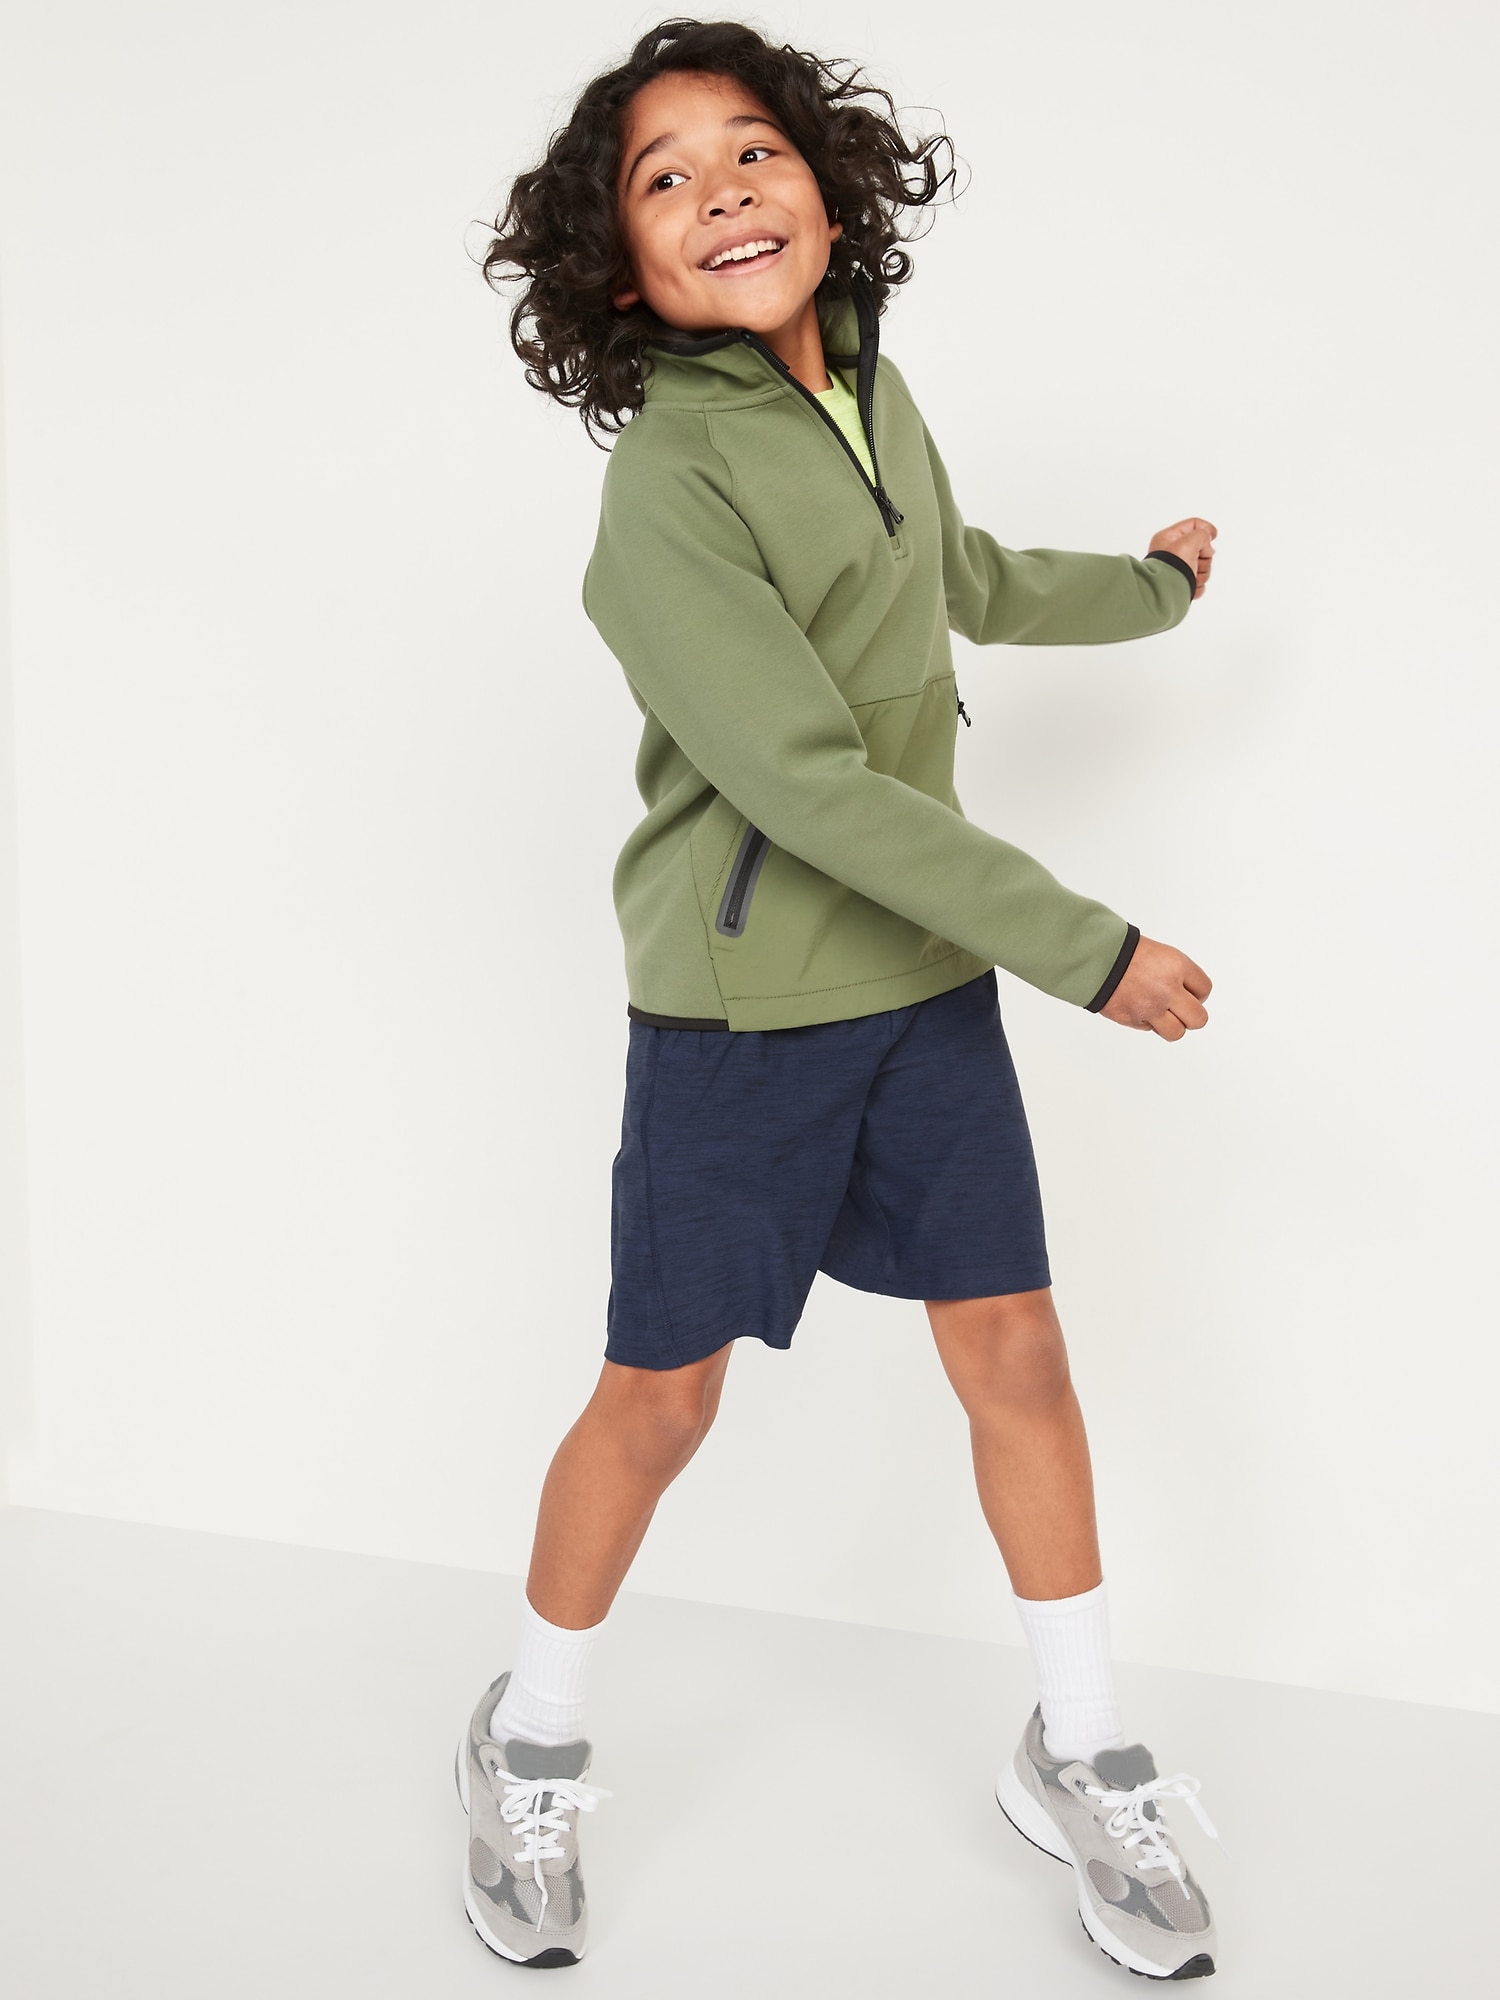 Breathe On Shorts For Boys | Old Navy